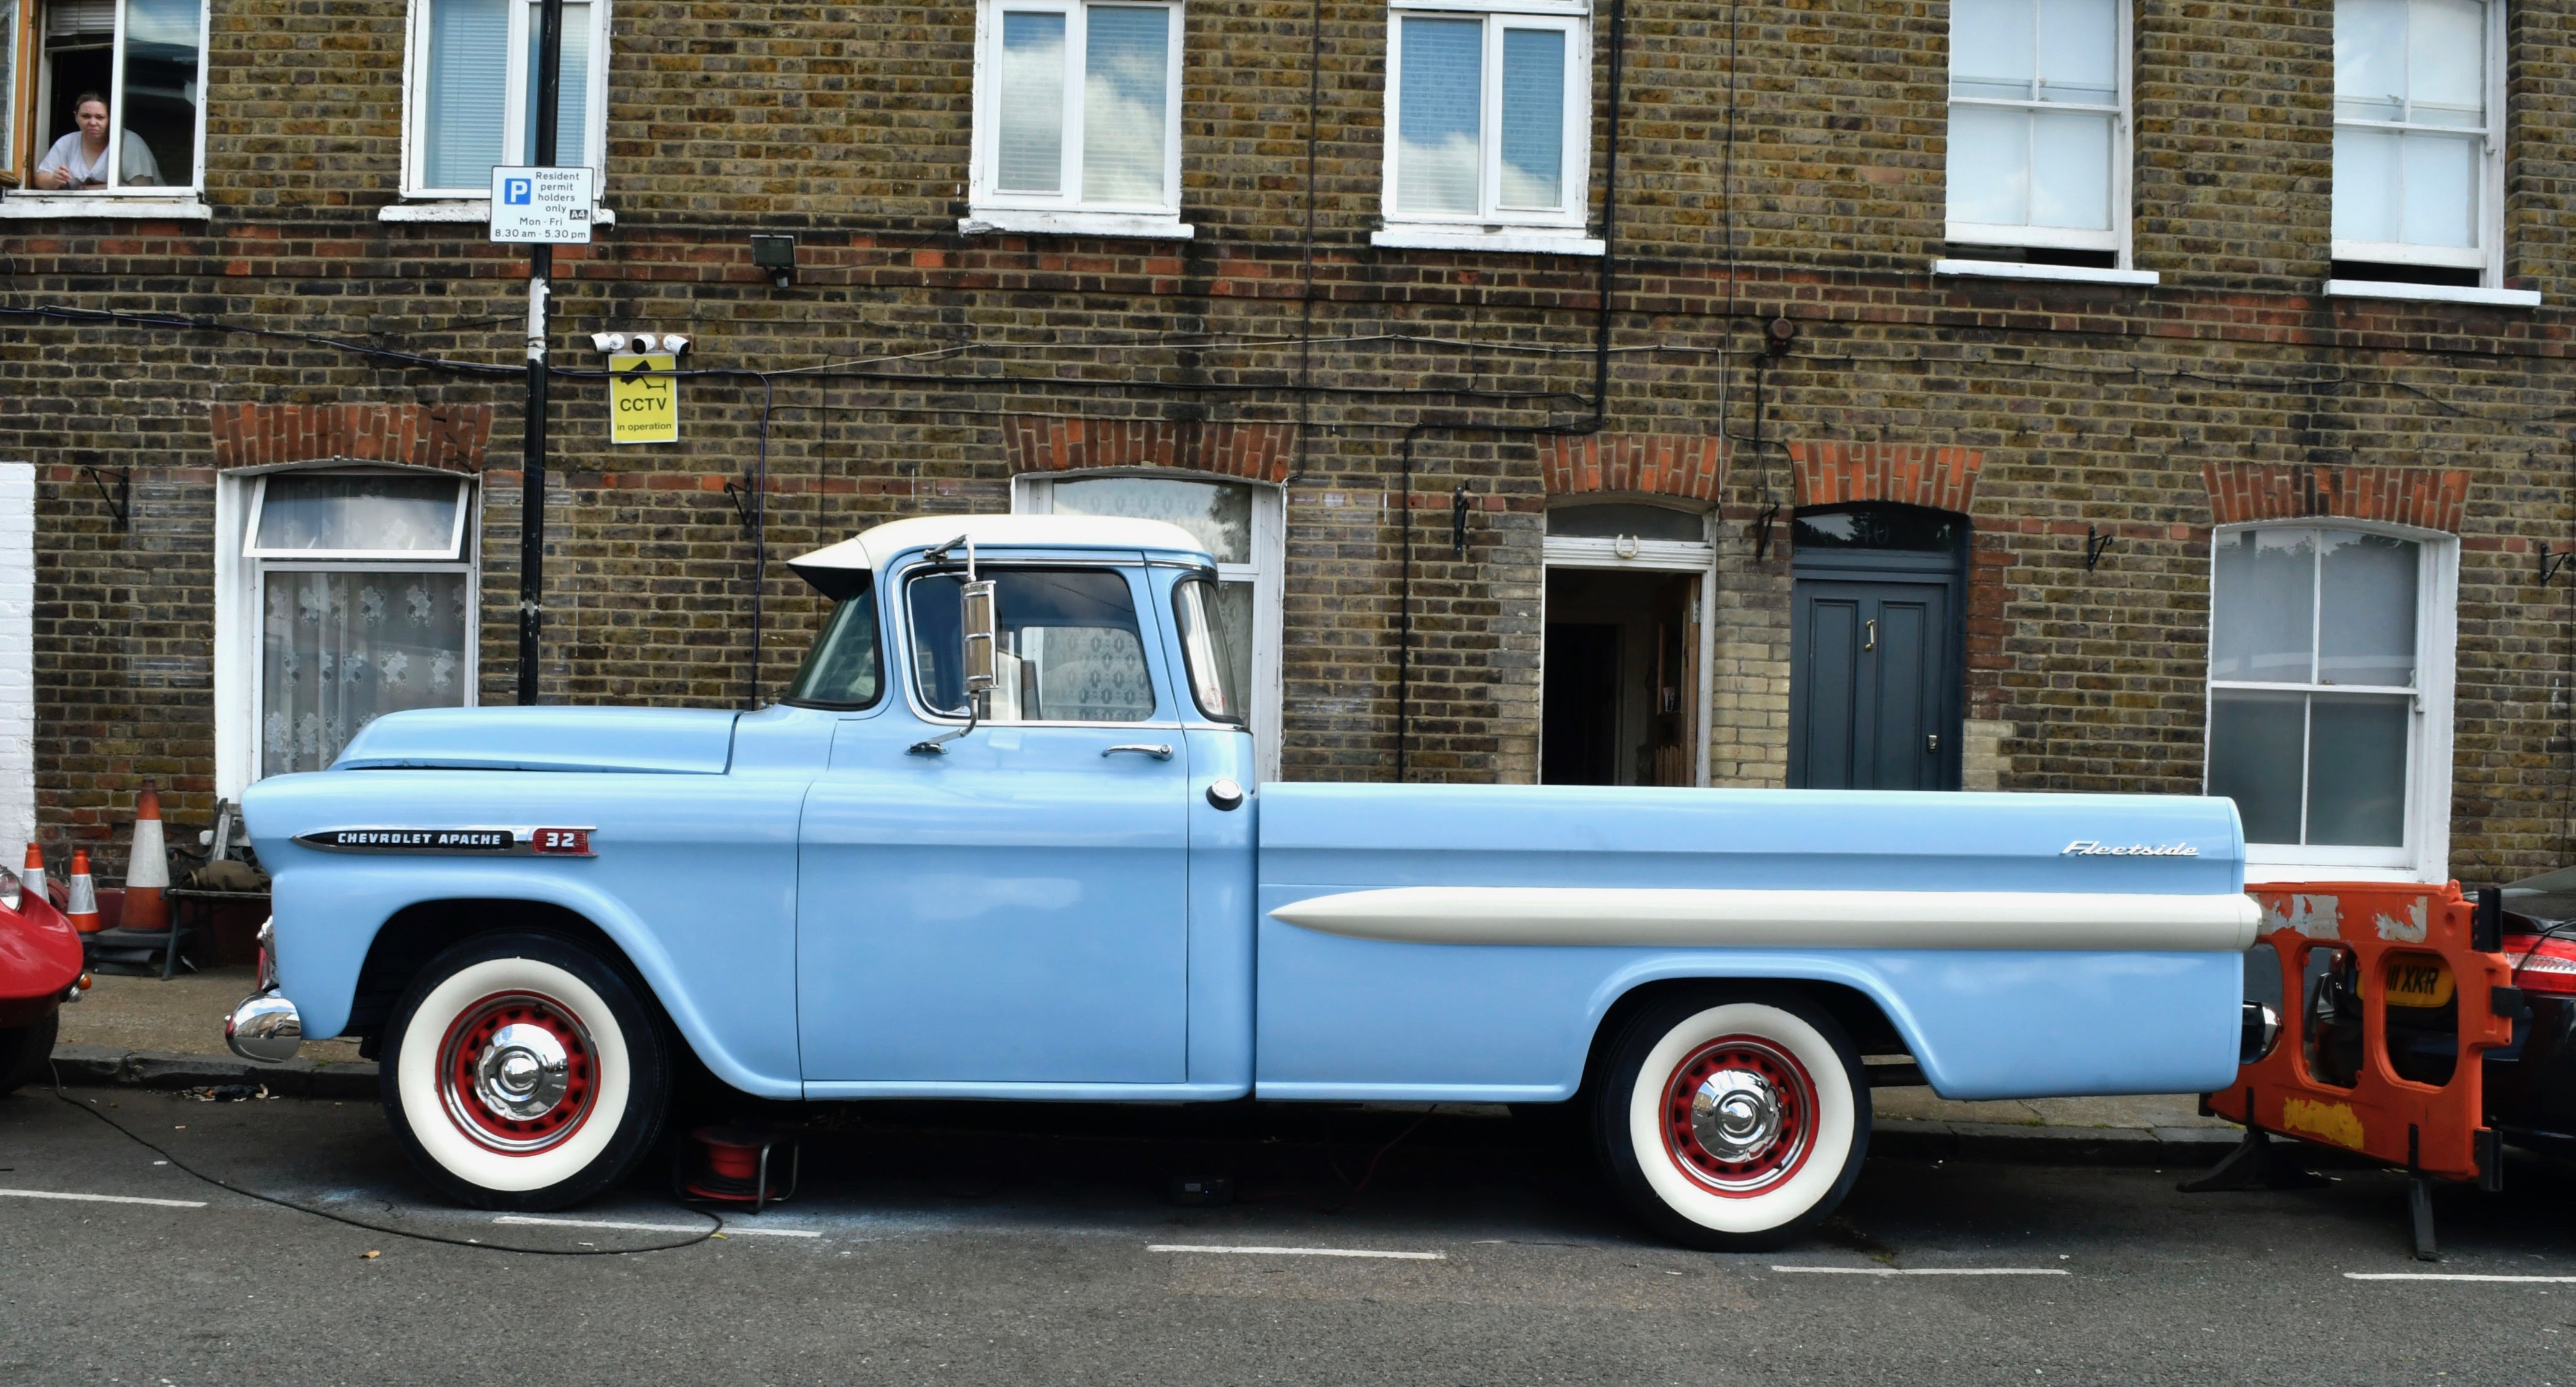 Chevy, ’59 Chevy pickup undergoing restoration, right on a street in London, ClassicCars.com Journal